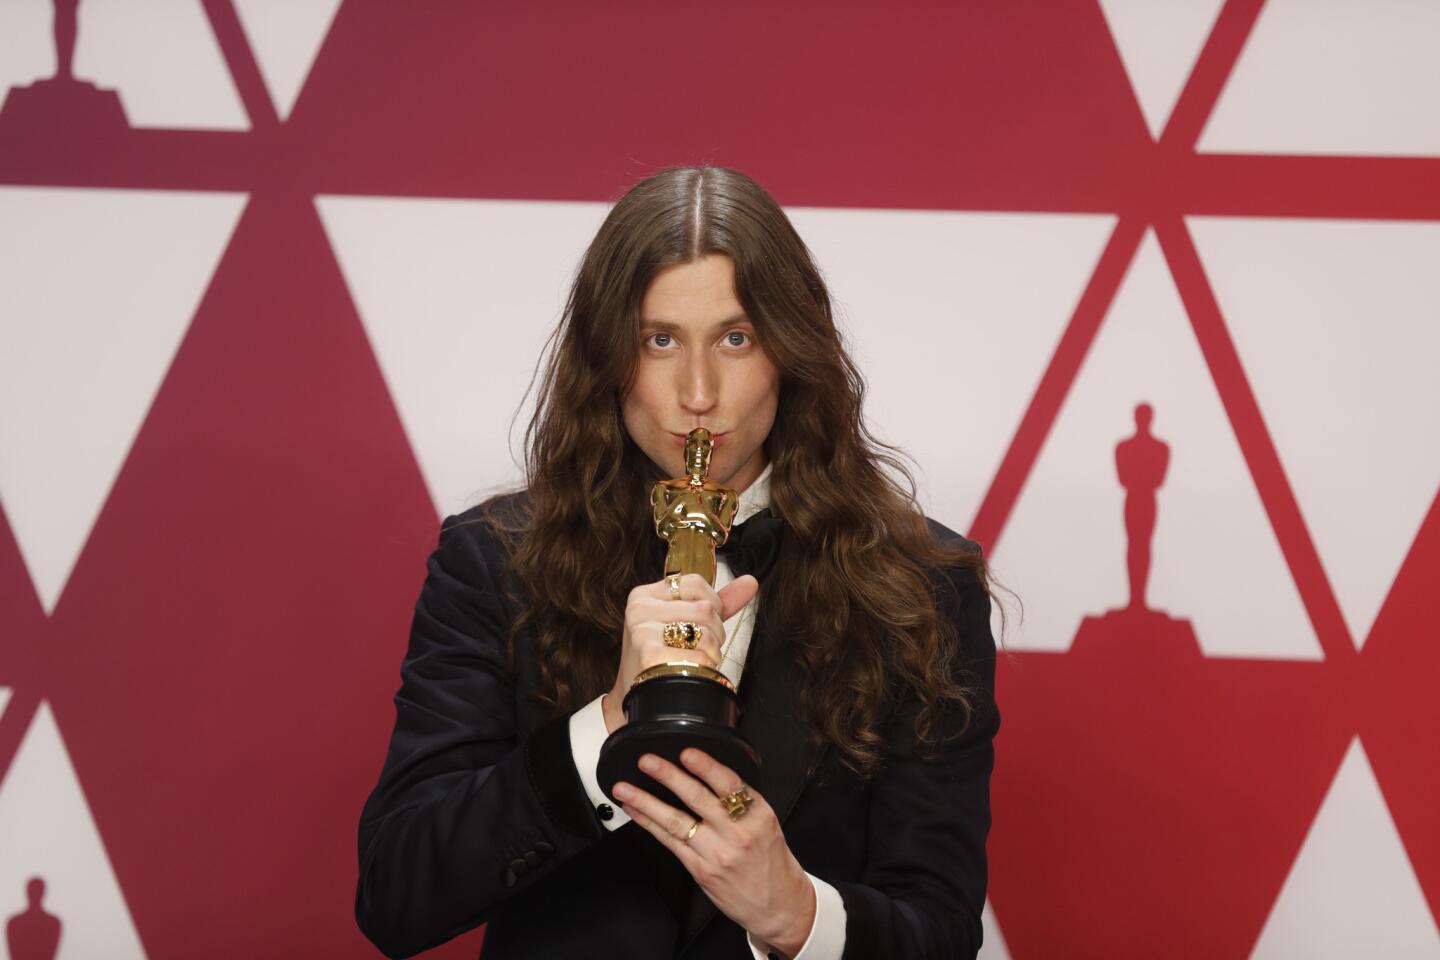 Ludwig Goransson, winner for the score in "Black Panther."